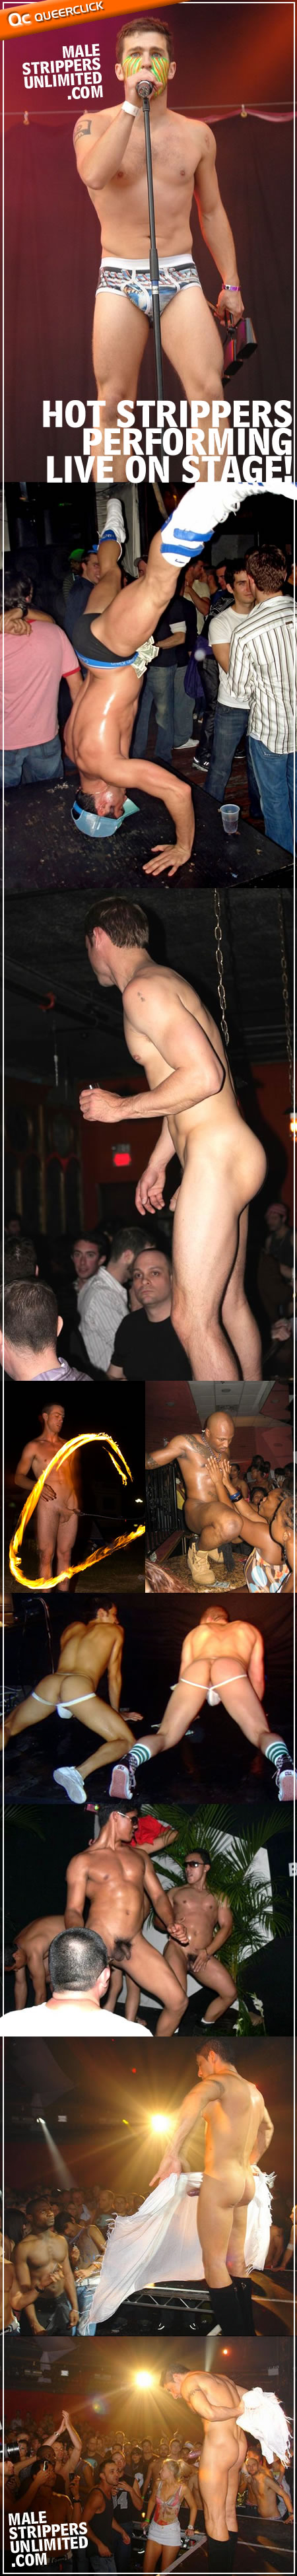 Hunky Strippers at MaleStrippersUnlimited.com